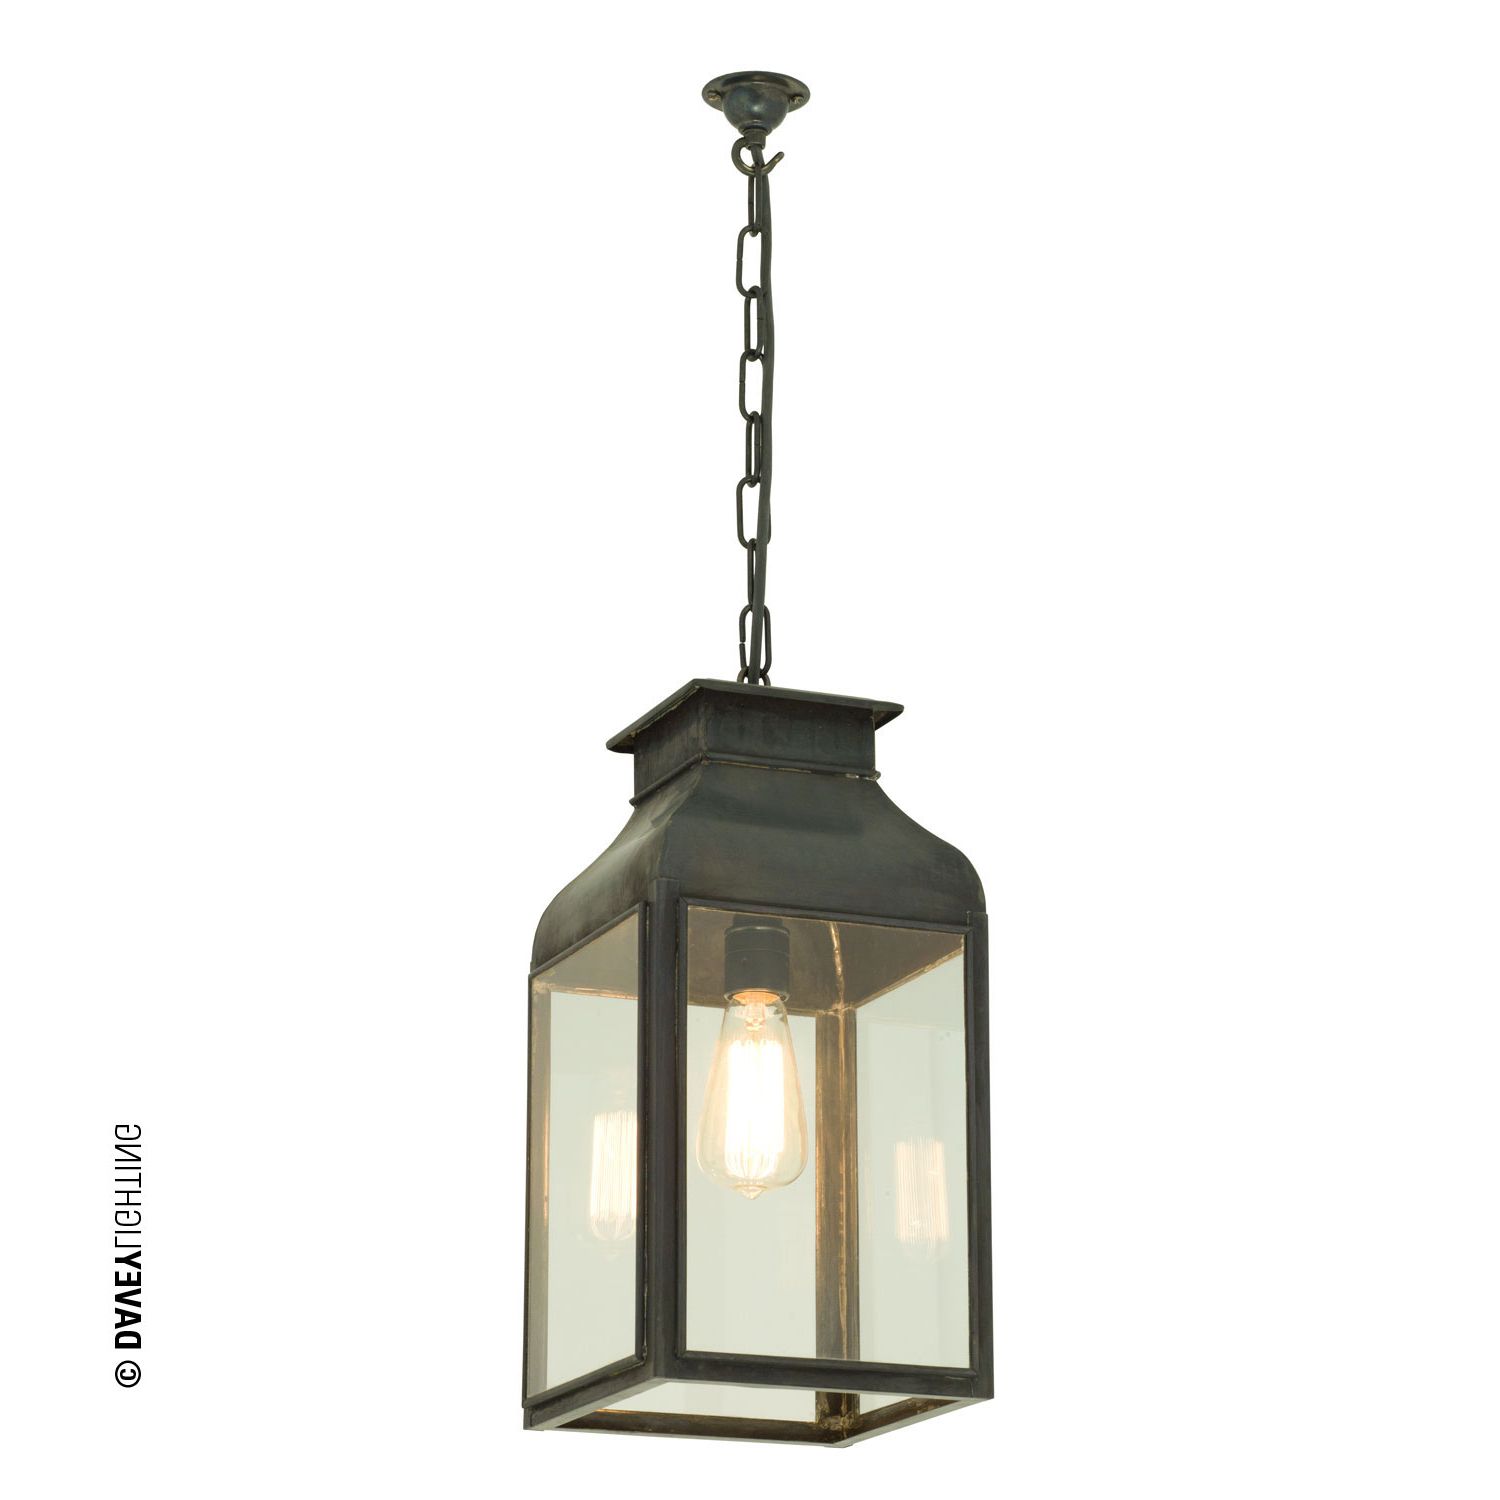 Just Roof Lanterns Throughout Favorite Lantern Chandeliers With Clear Glass (View 14 of 15)